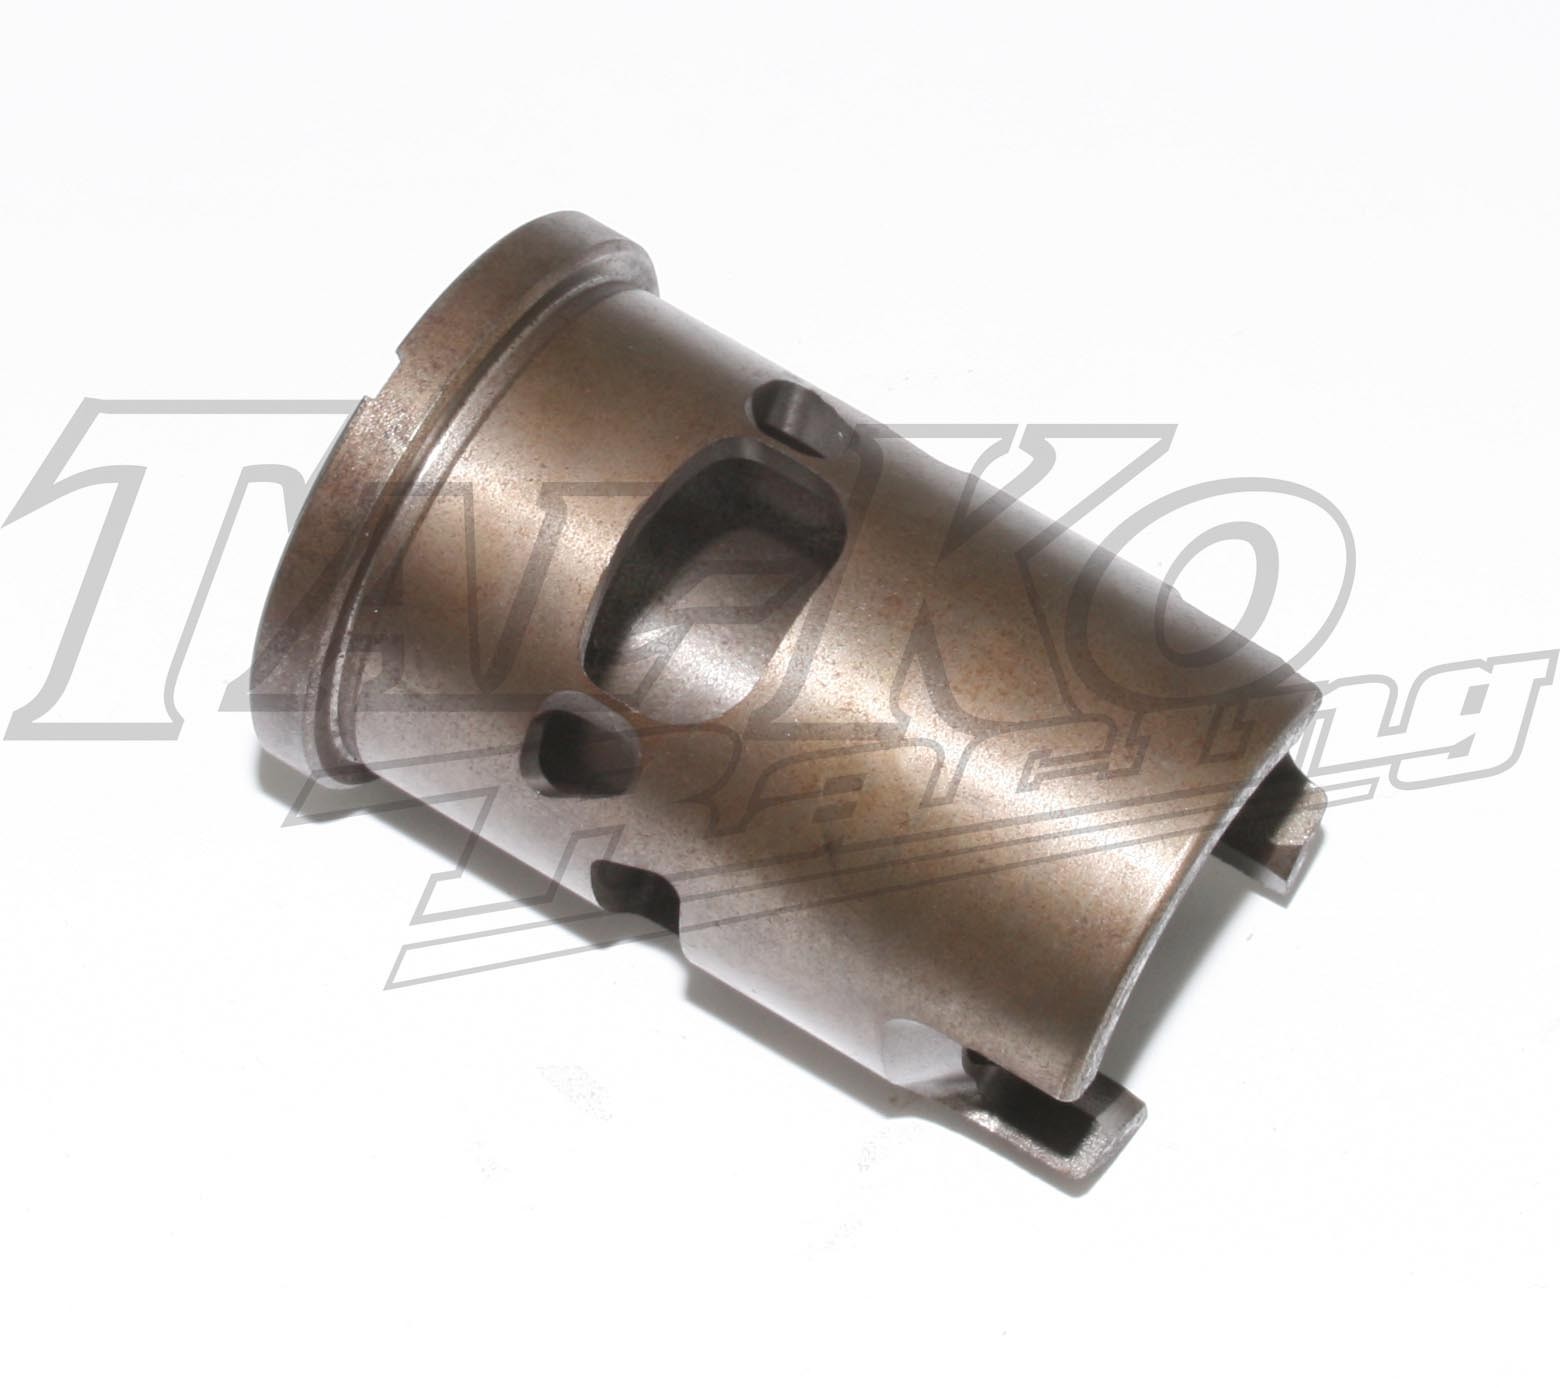 FOX CNC OVAL EXHAUST PORT TT LINER AUXILIARY EXHAUST PORTS TYPE C